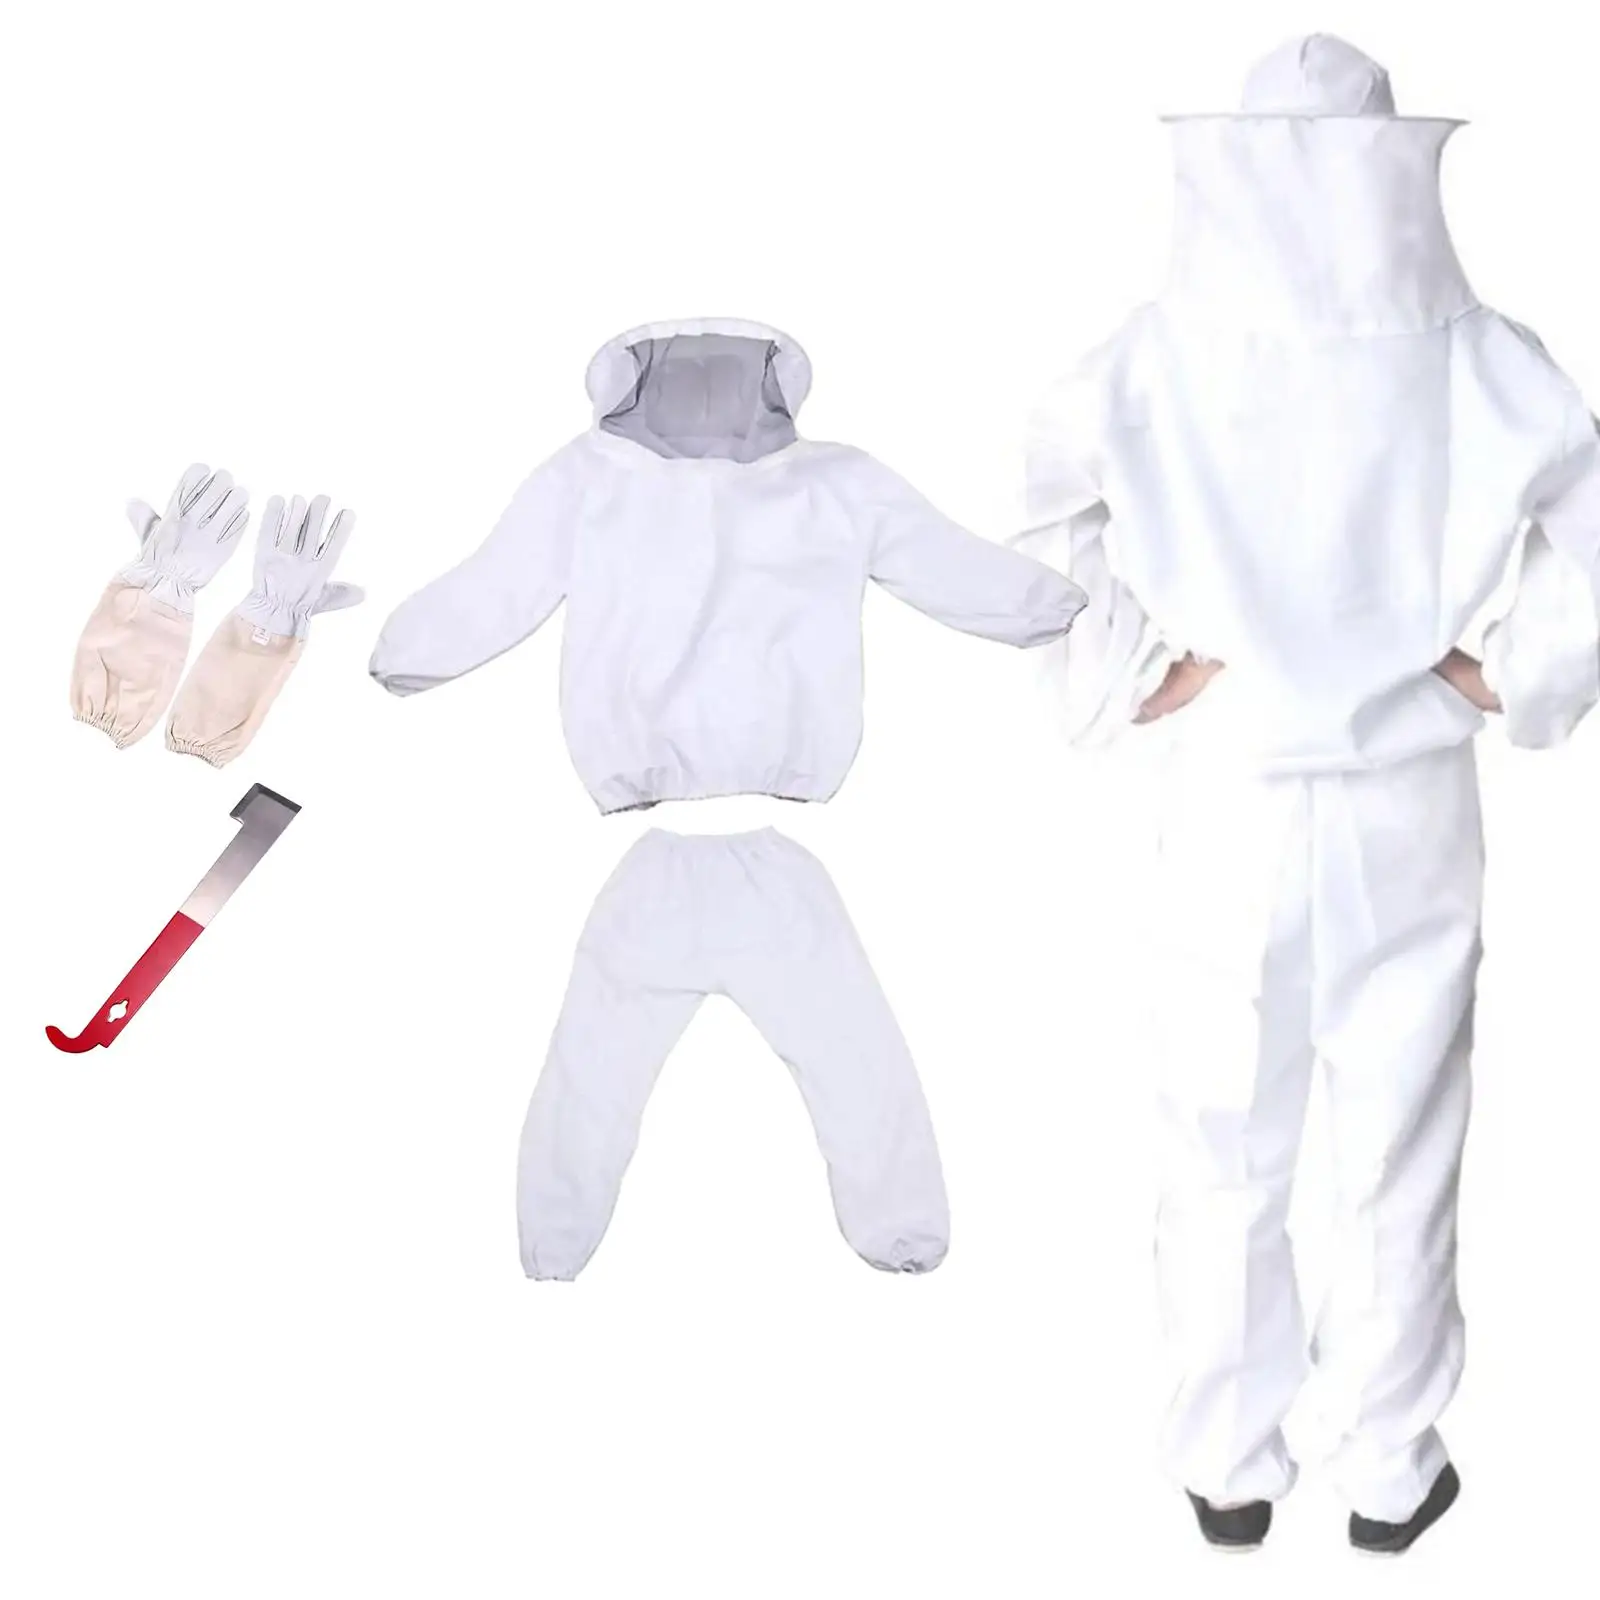 Beekeeping Suit Cotton Protective Equipment Anti Bee Suit Beekeeping Clothes for Male and Female